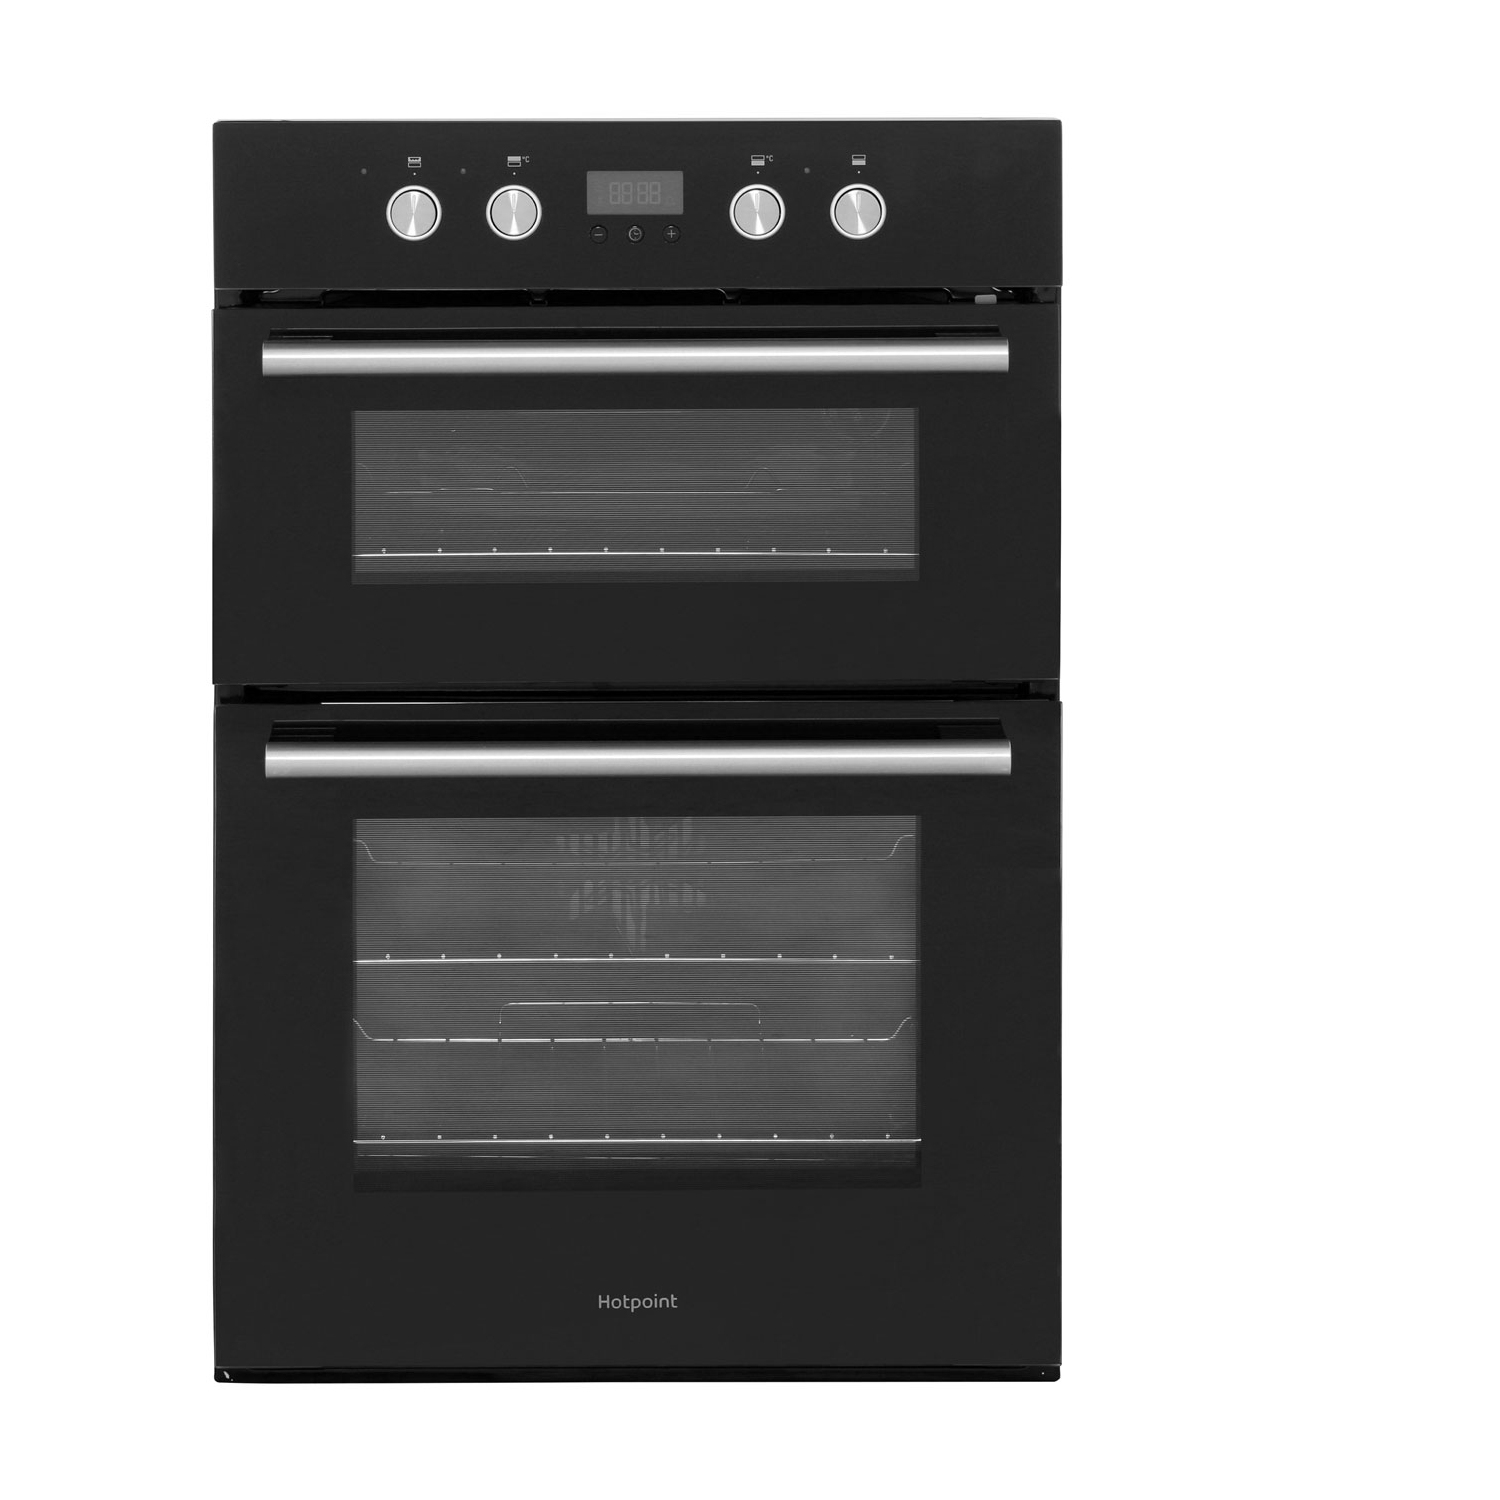 Hotpoint Built In Double Oven (black - A/A energy rating) - 3